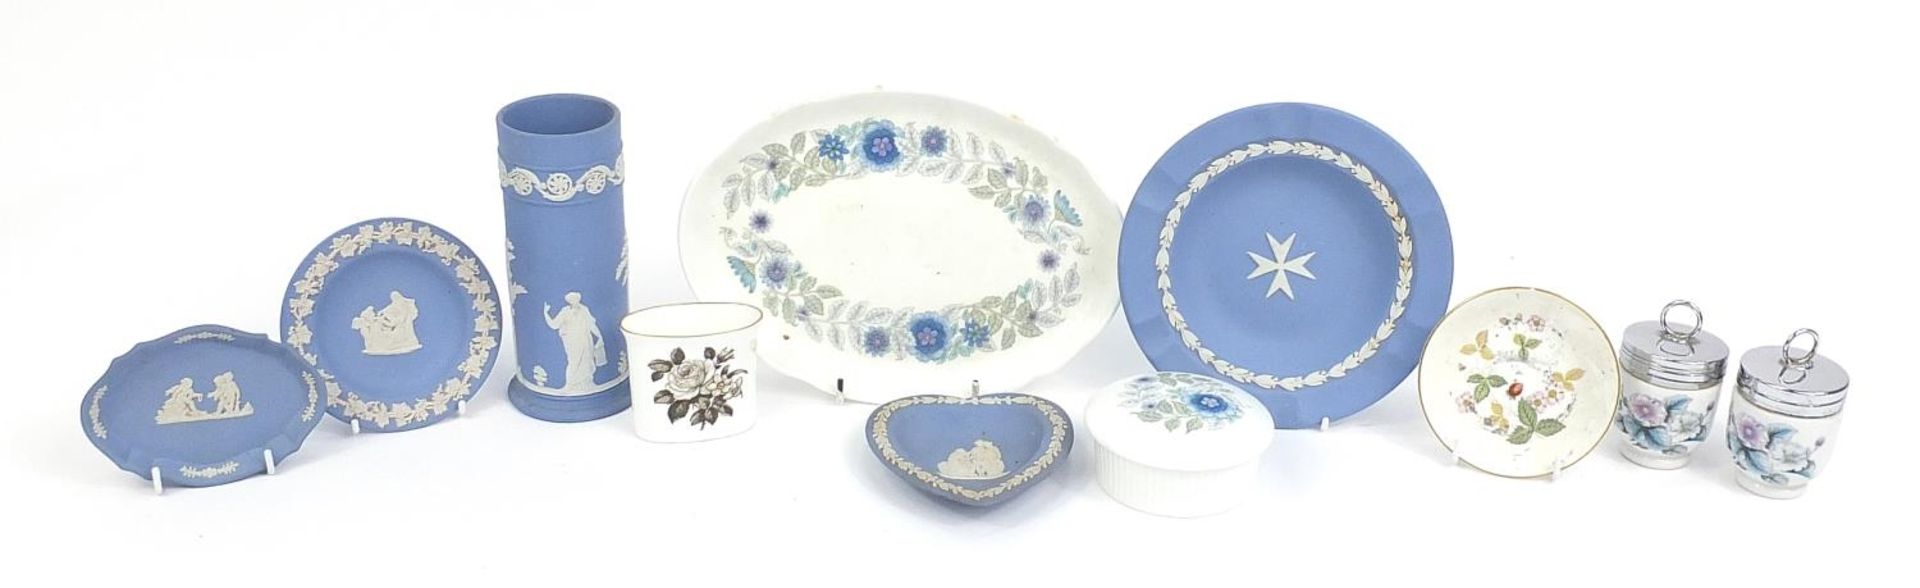 Assorted Wedgwood and Worcester ceramics including blue and white Jasperware vase, plates, pin